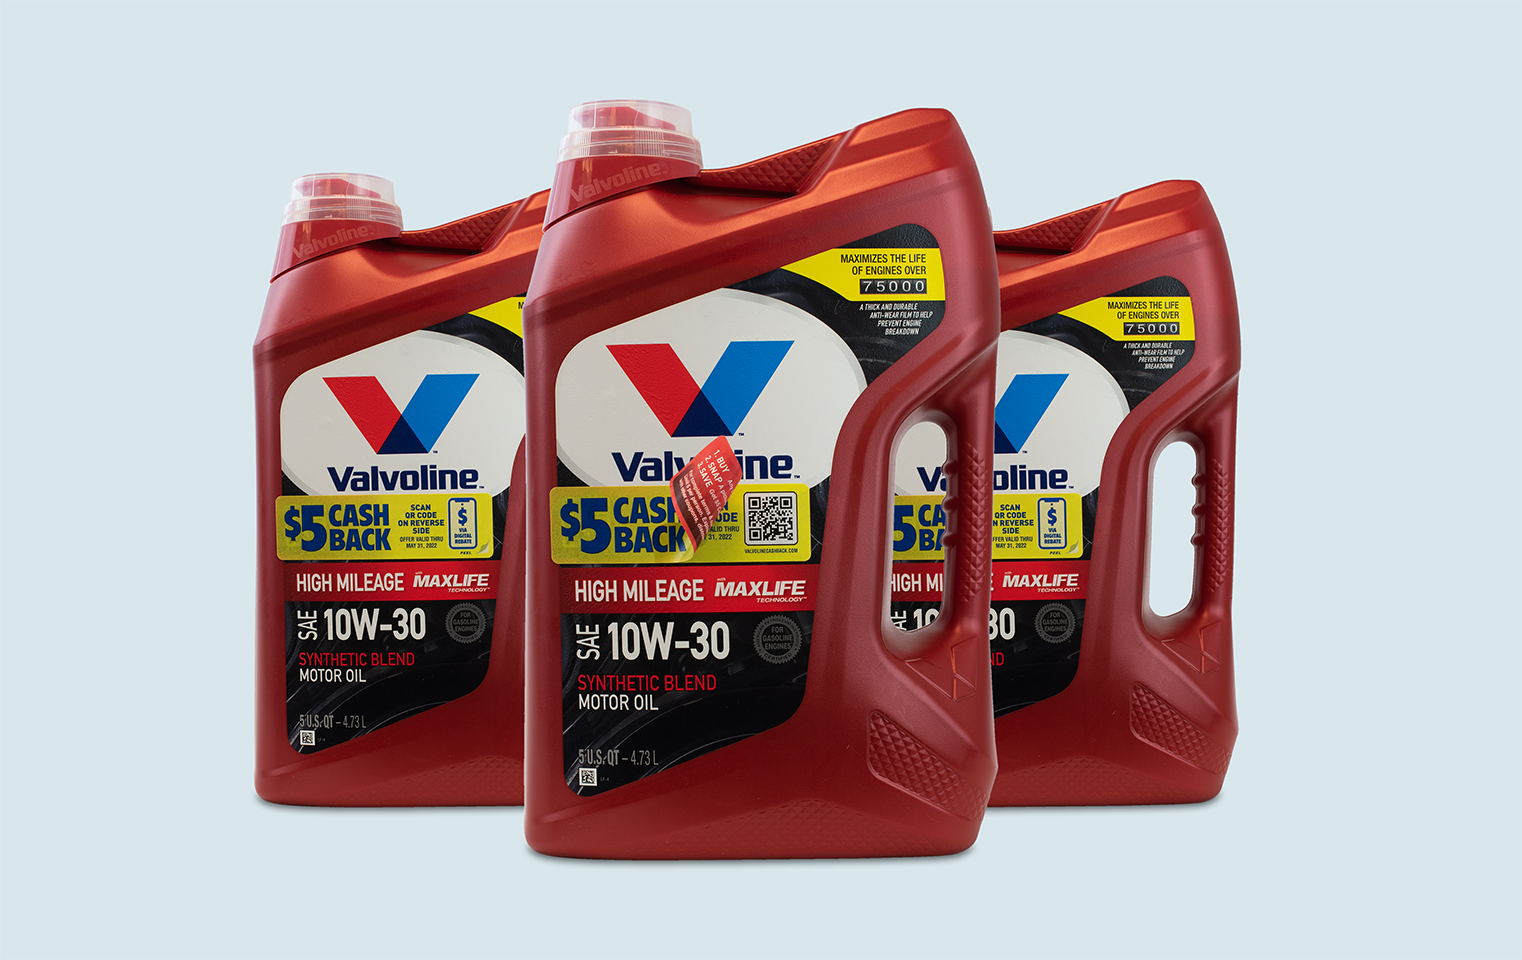 Image of Extended Content Labels Lead the Way for Valvoline’s Cash Back Promotion